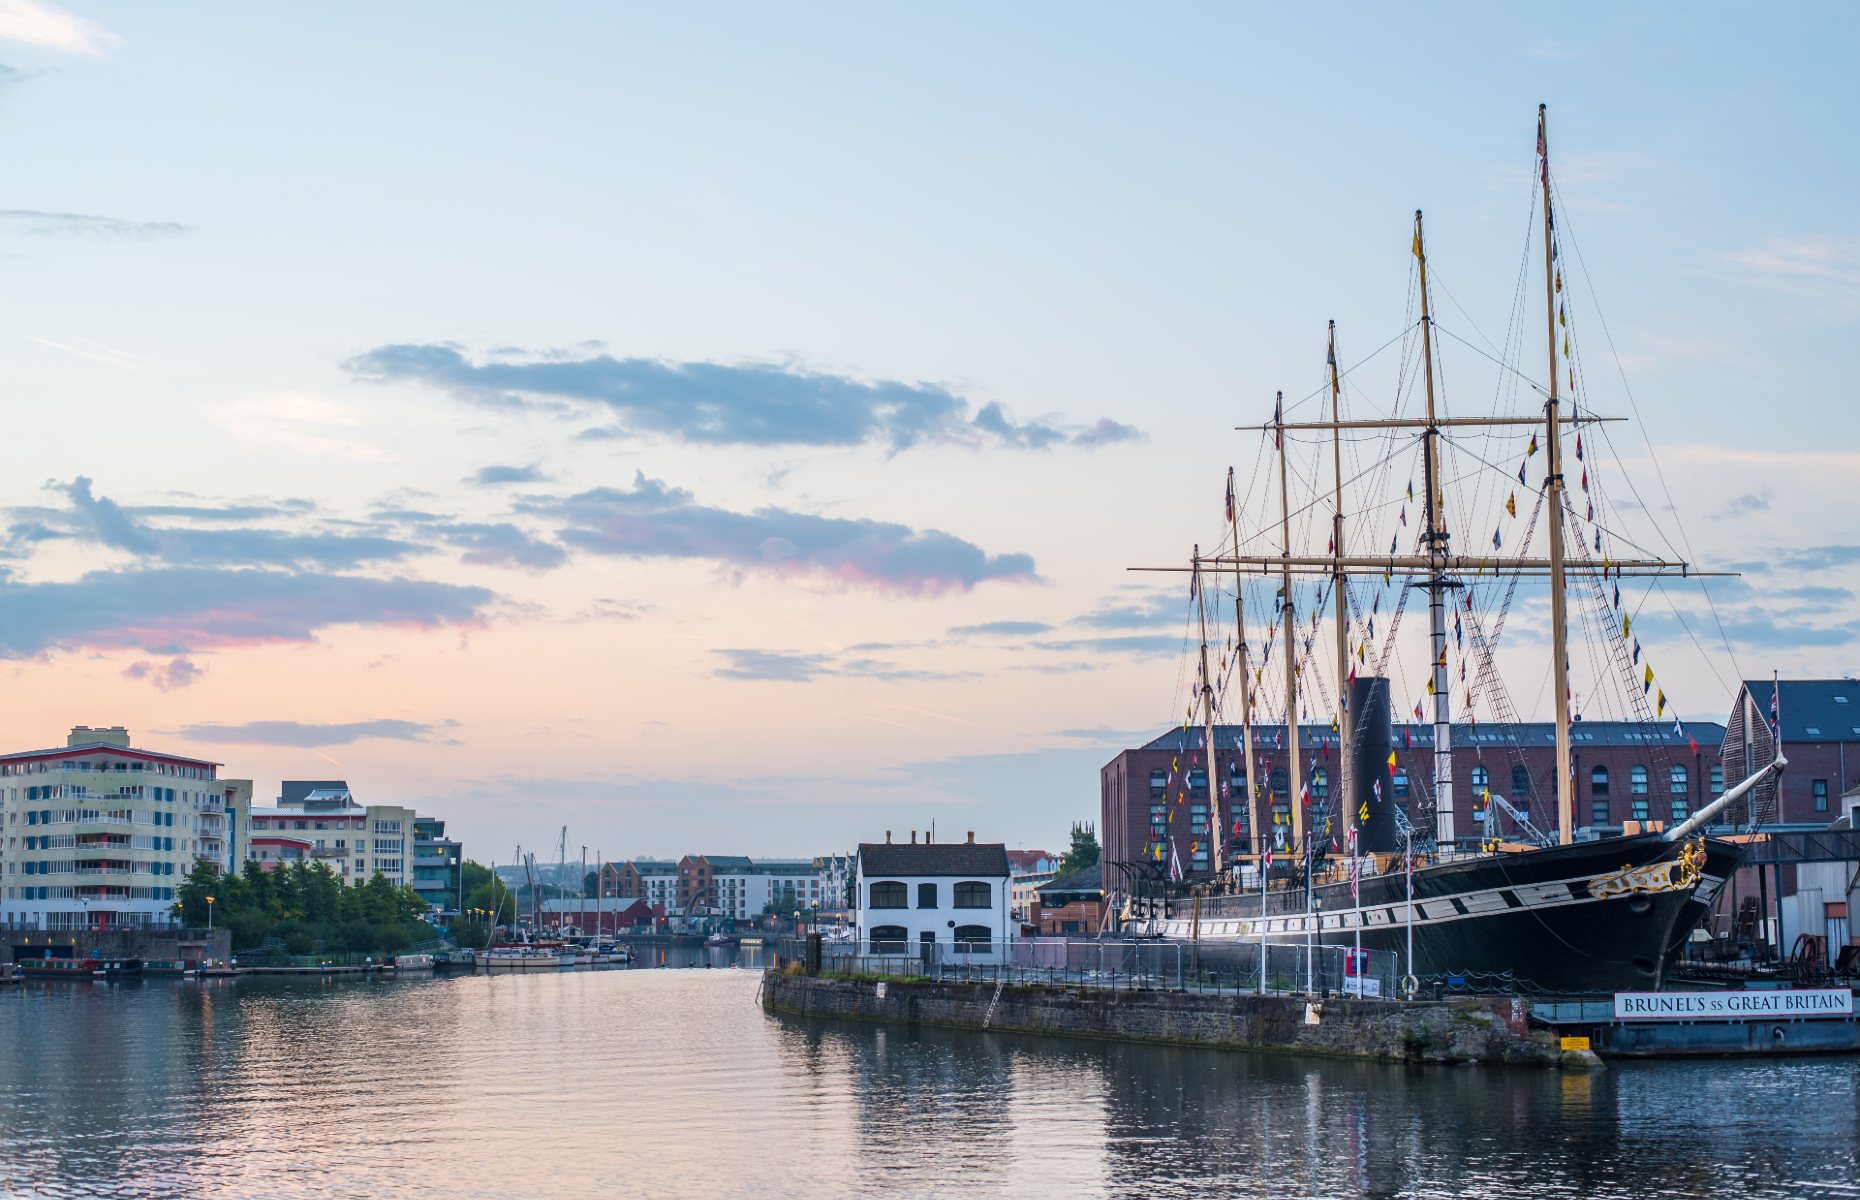 SS Great Britain [Image: Sion Hannuna/Shutterstock]